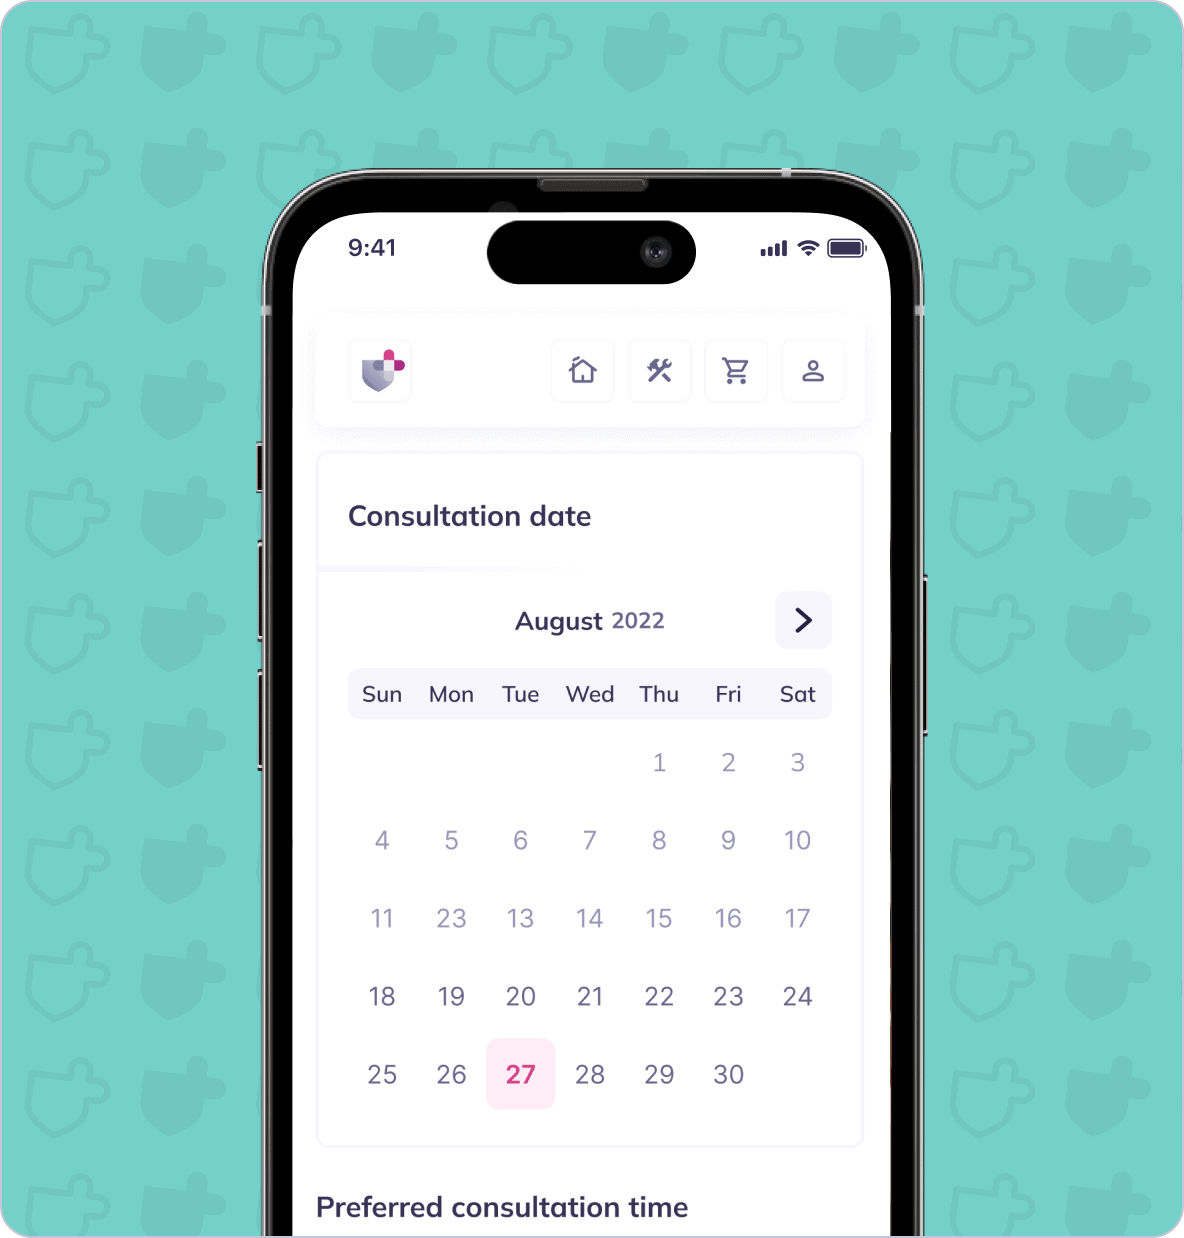 A smartphone screen shows a consultation date booking interface for August 2022, with the 27th highlighted. Icons for home, calendar, prescription, and shopping cart are at the top.